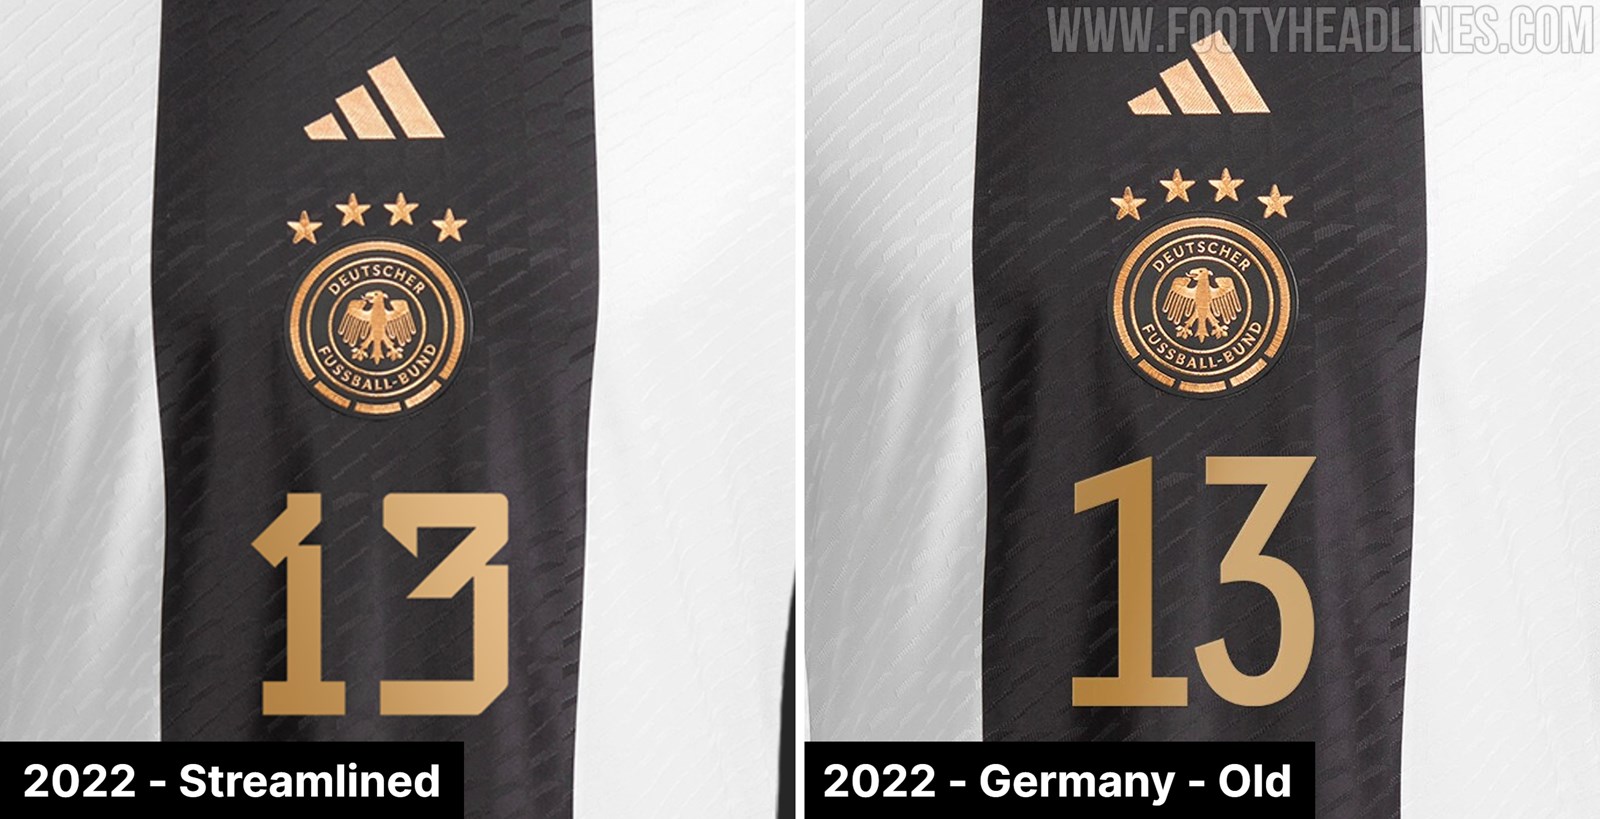 Adidas 2022 World Cup Kit Font Released - Footy Headlines